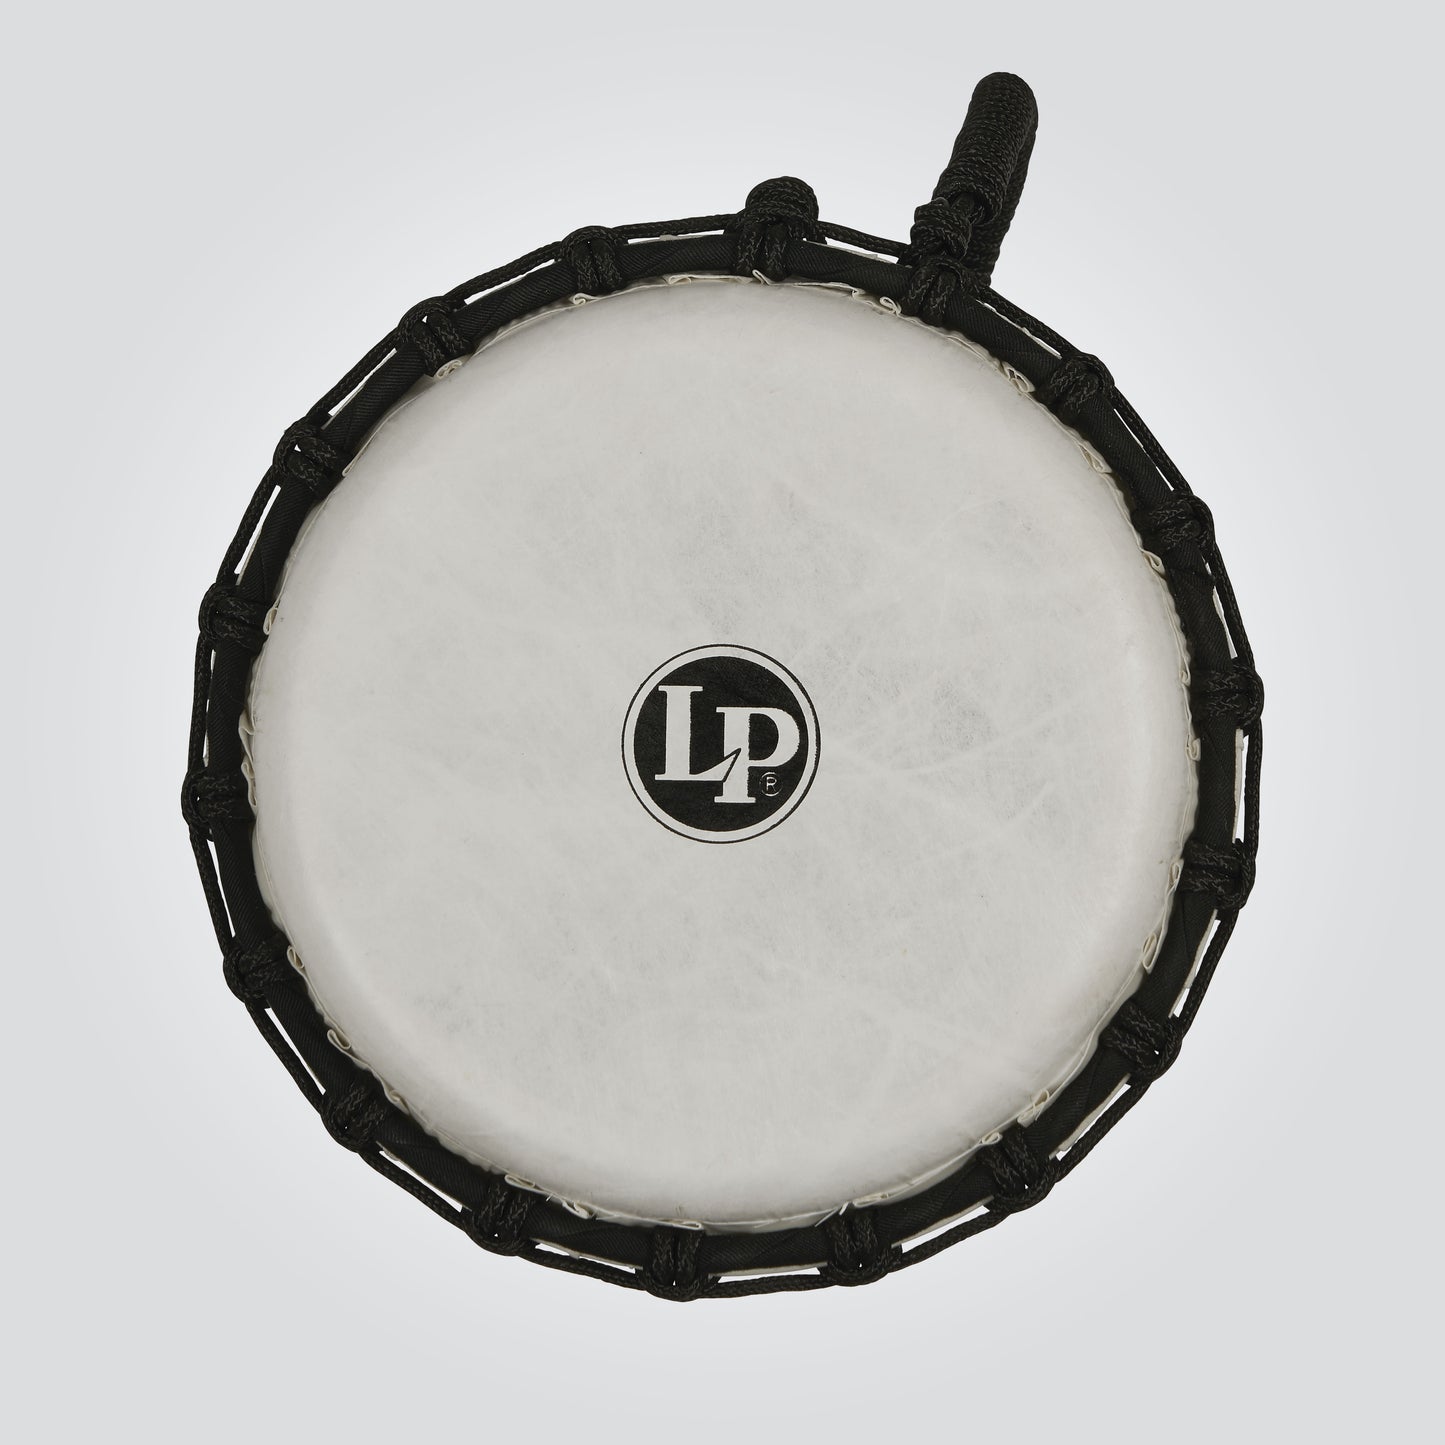 Latin Percussion 10-inch Rope Tuned Circle Djembe with Perfect-Pitch head - Blue Marble - LP2010-BM - Poppa's Music 